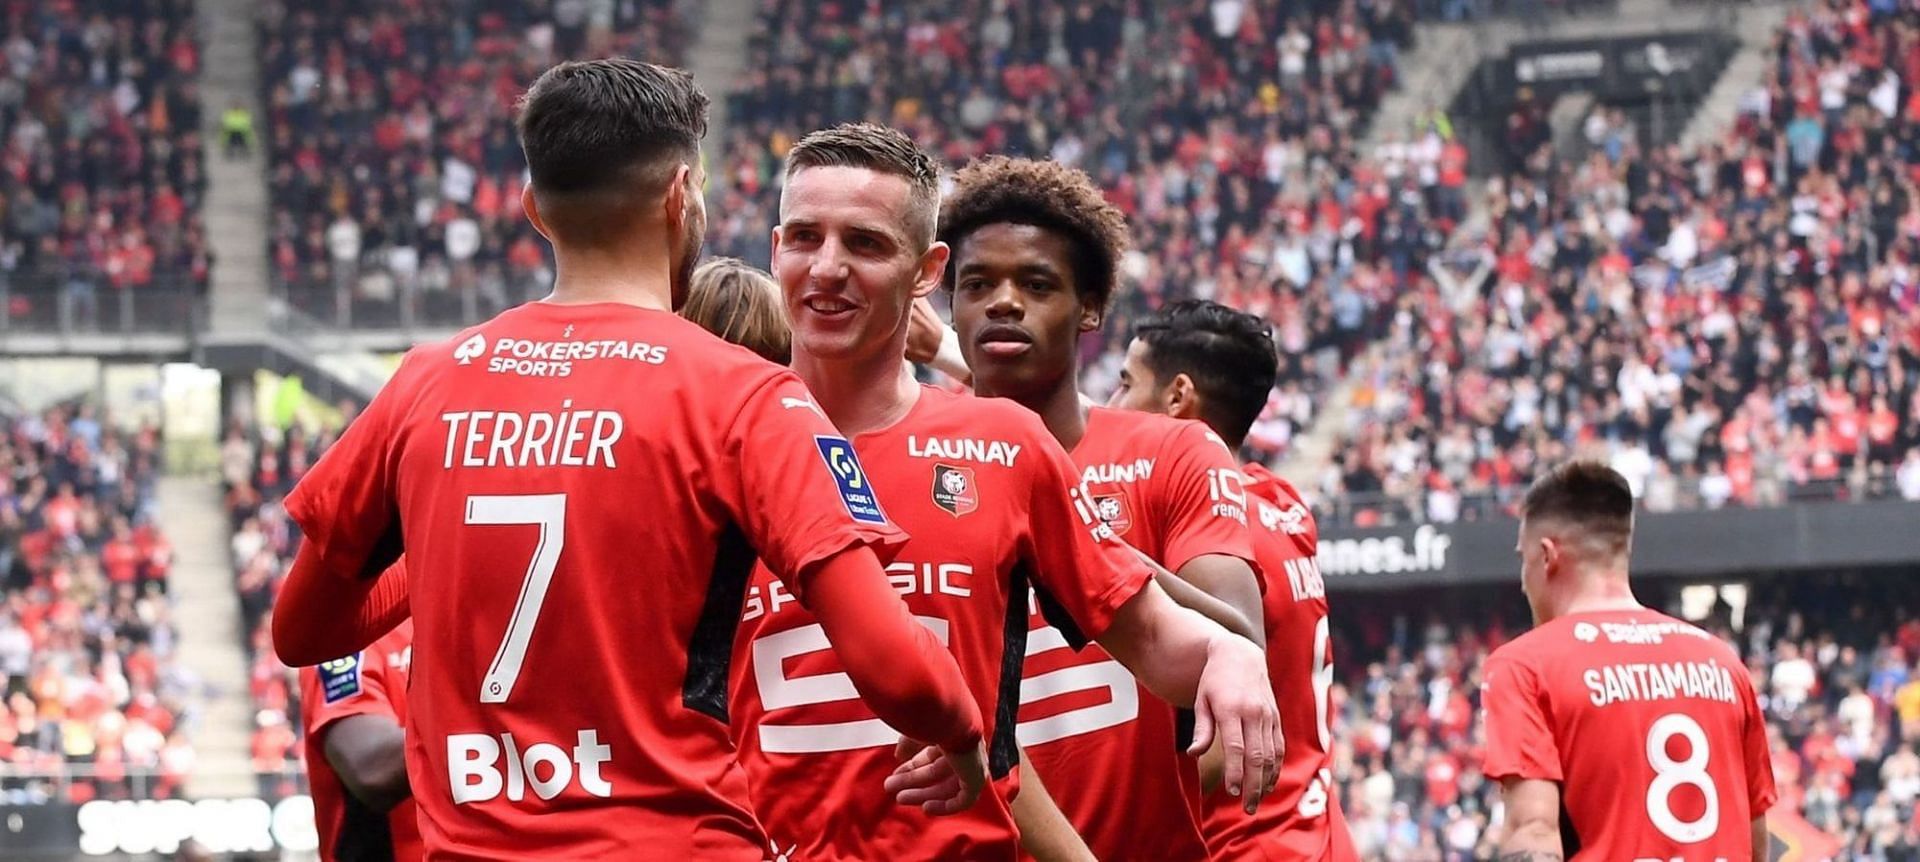 Rennes will be hopeful of a positive result when they face Saint-Etienne this weekend.